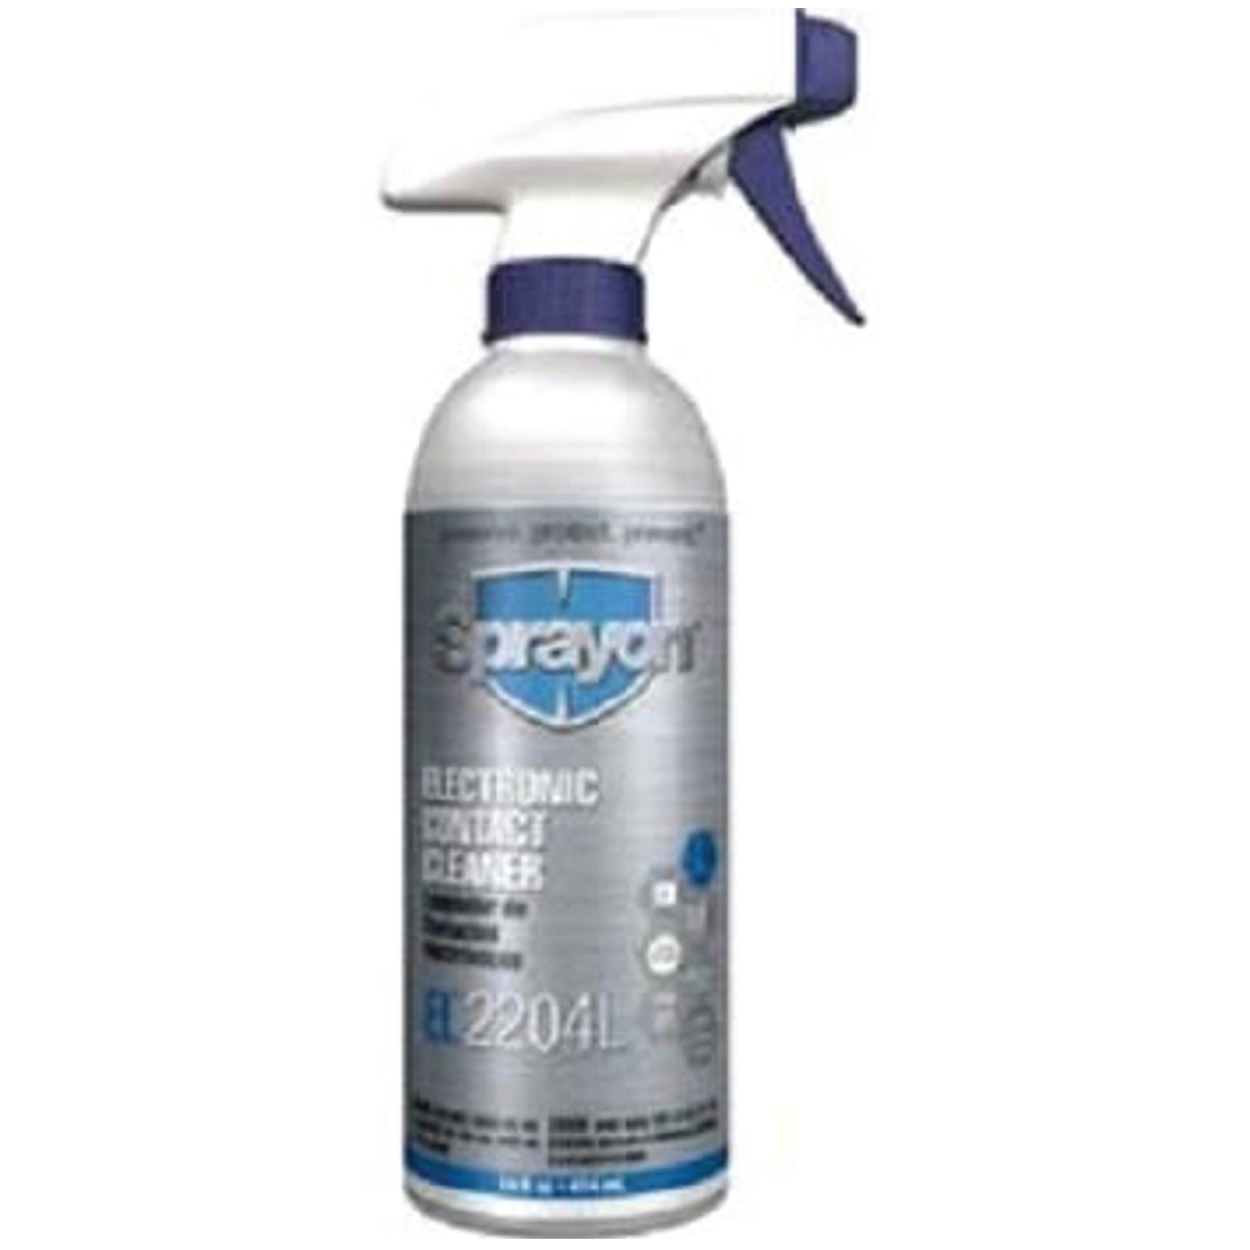 Precision Electrical Contact Cleaner